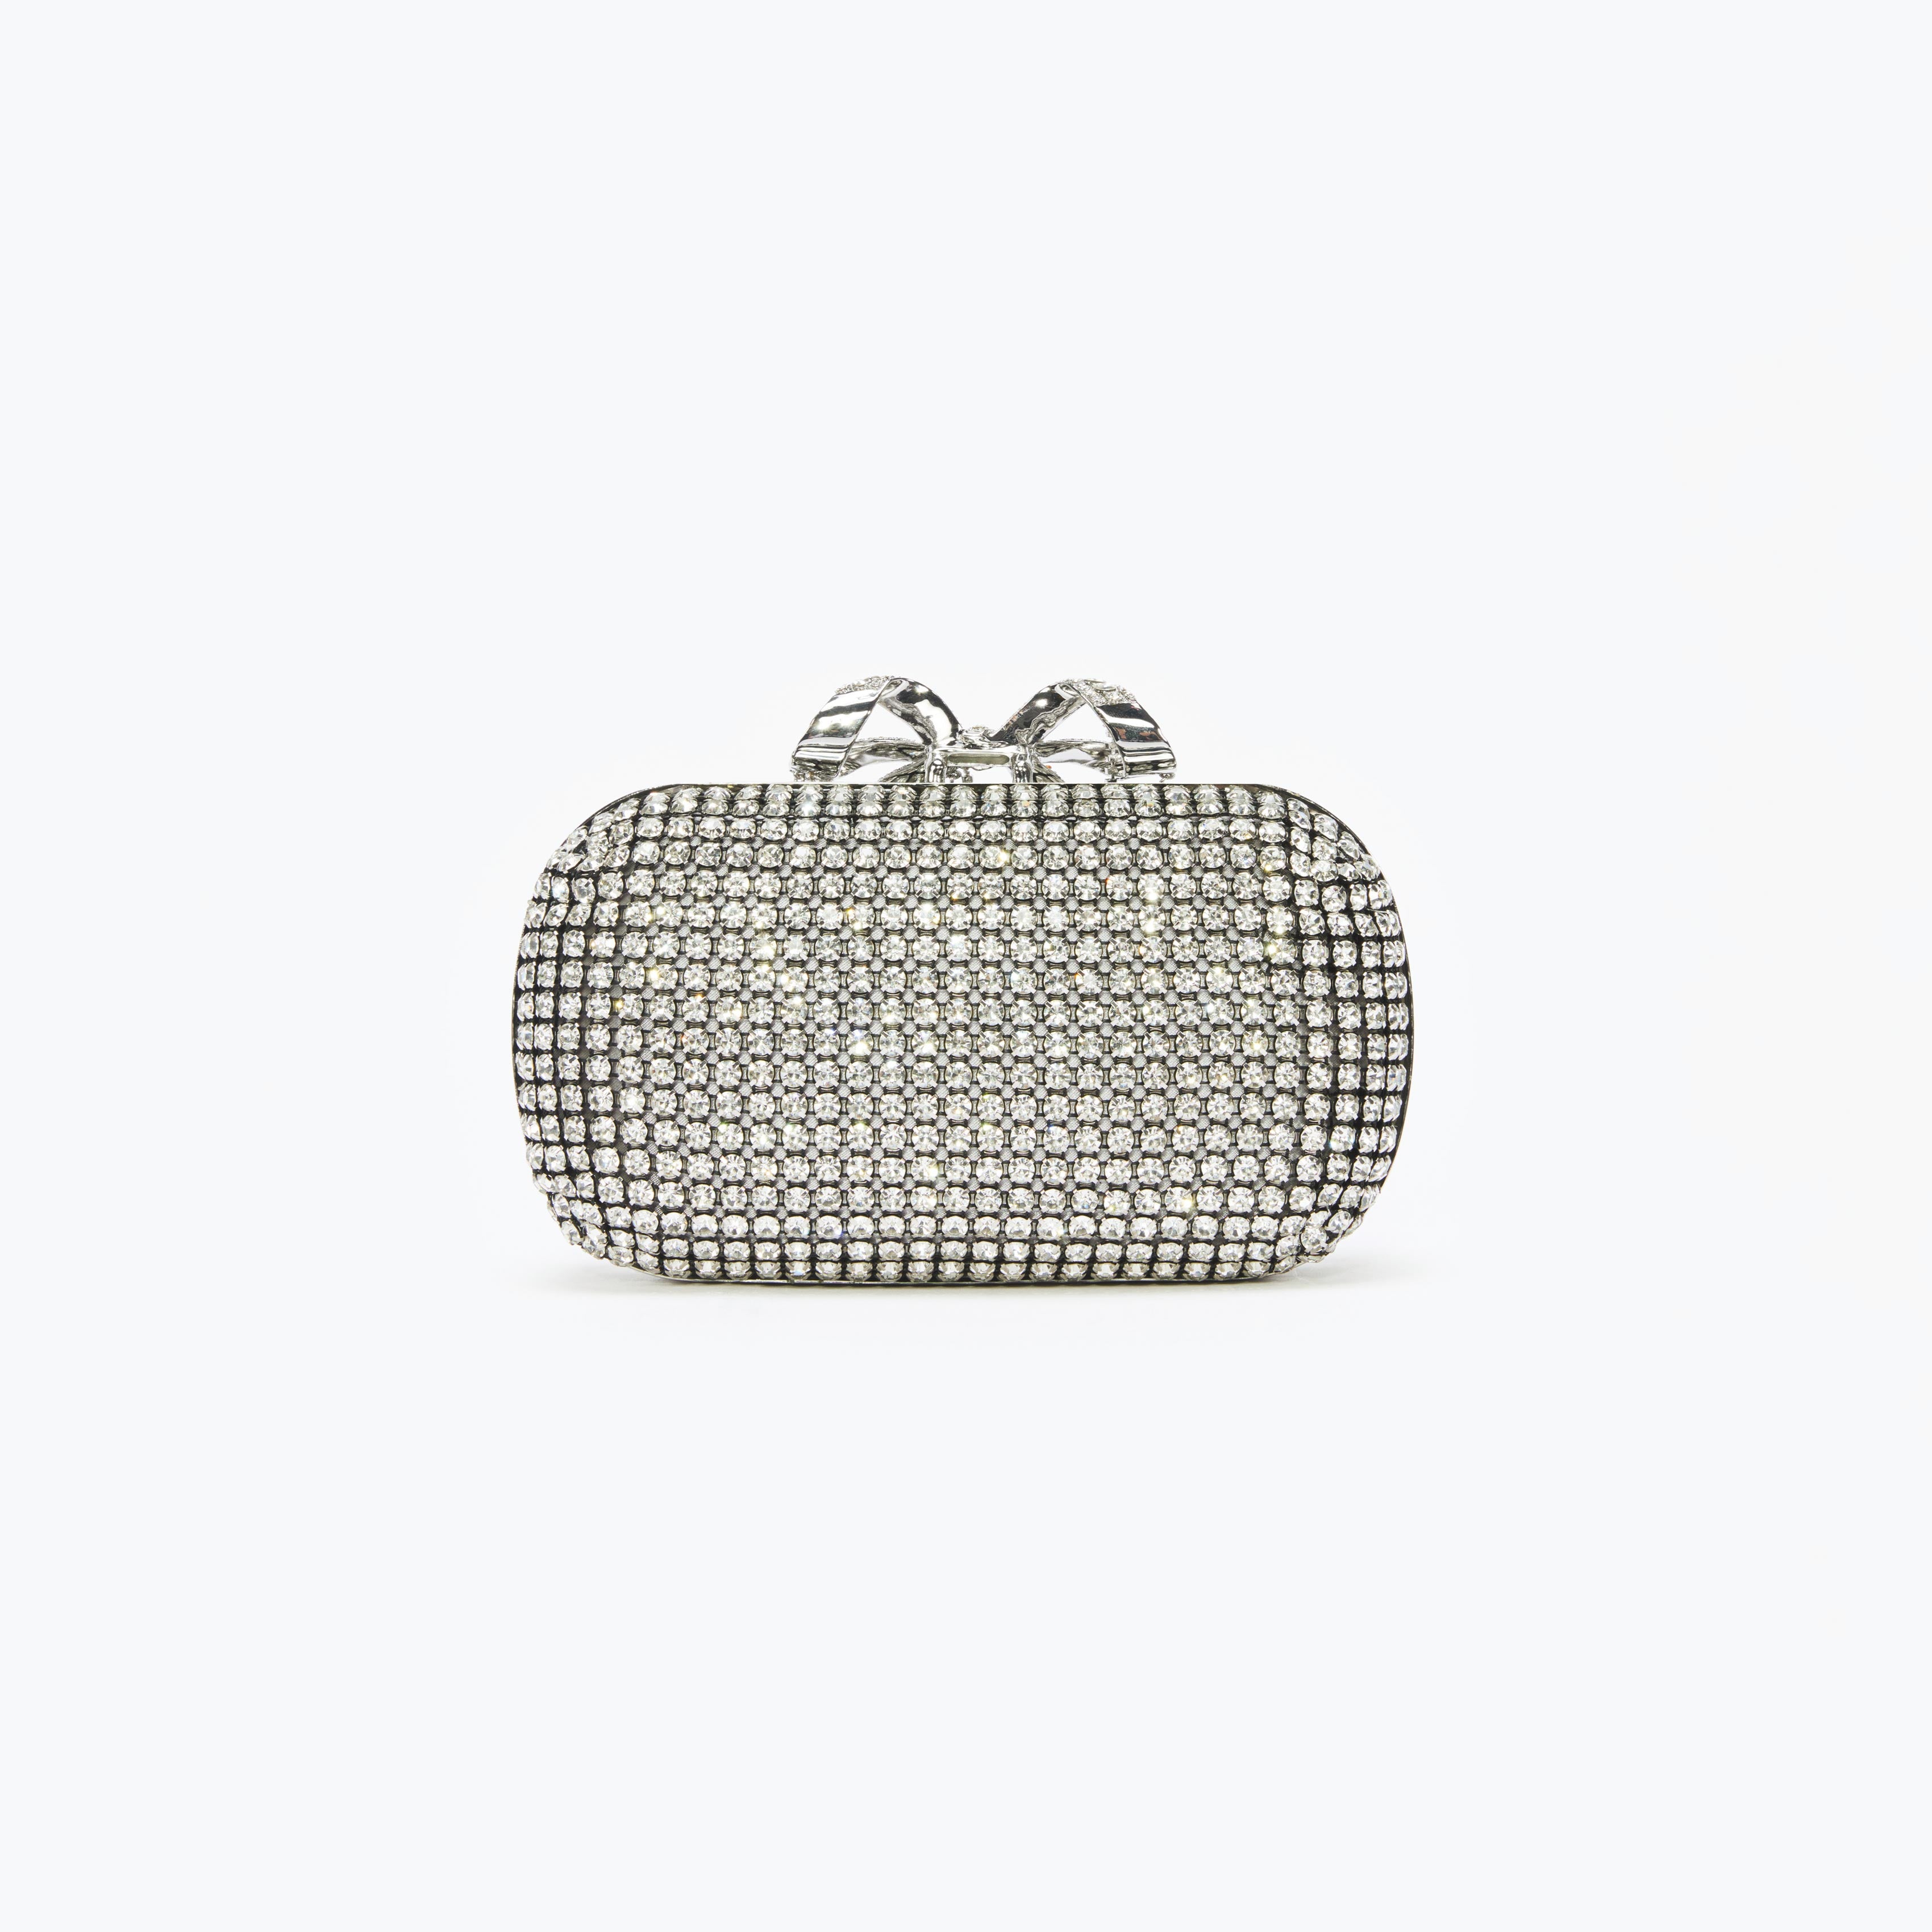 Art Deco Clutch With Sterling Silver And Marcasite Clasp • PreAdored®  Sustainable Luxury